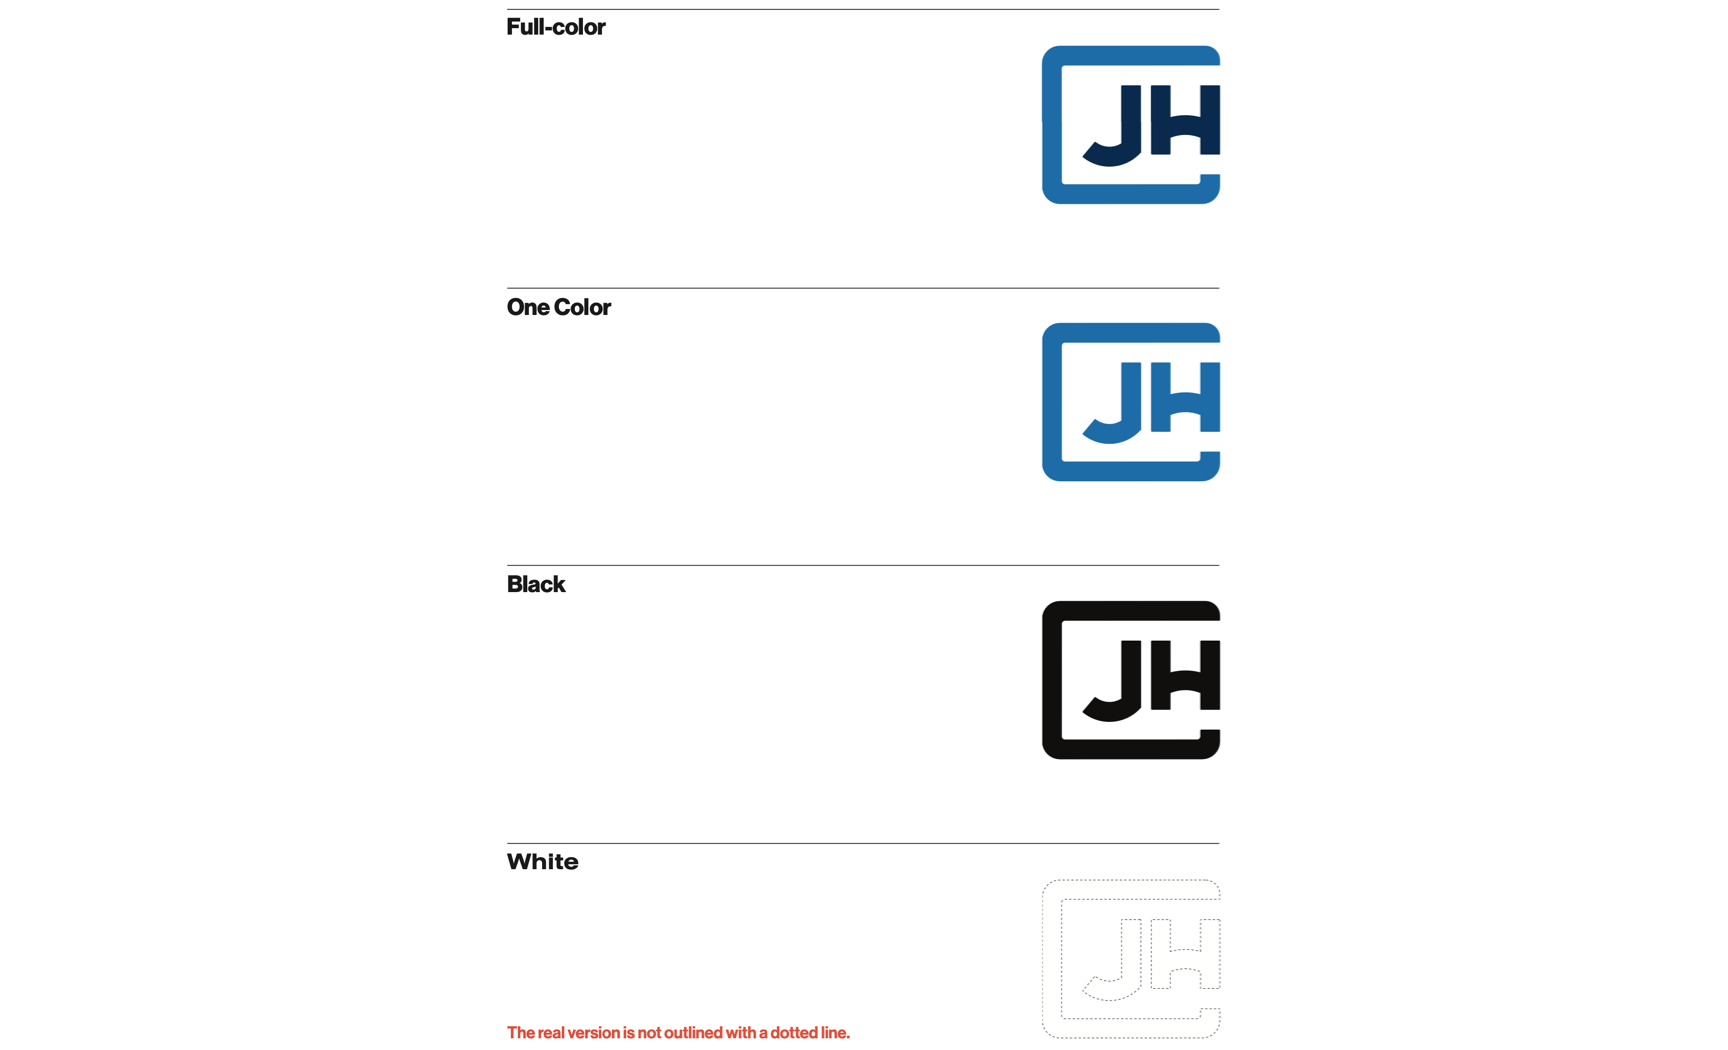 JH logo style examples